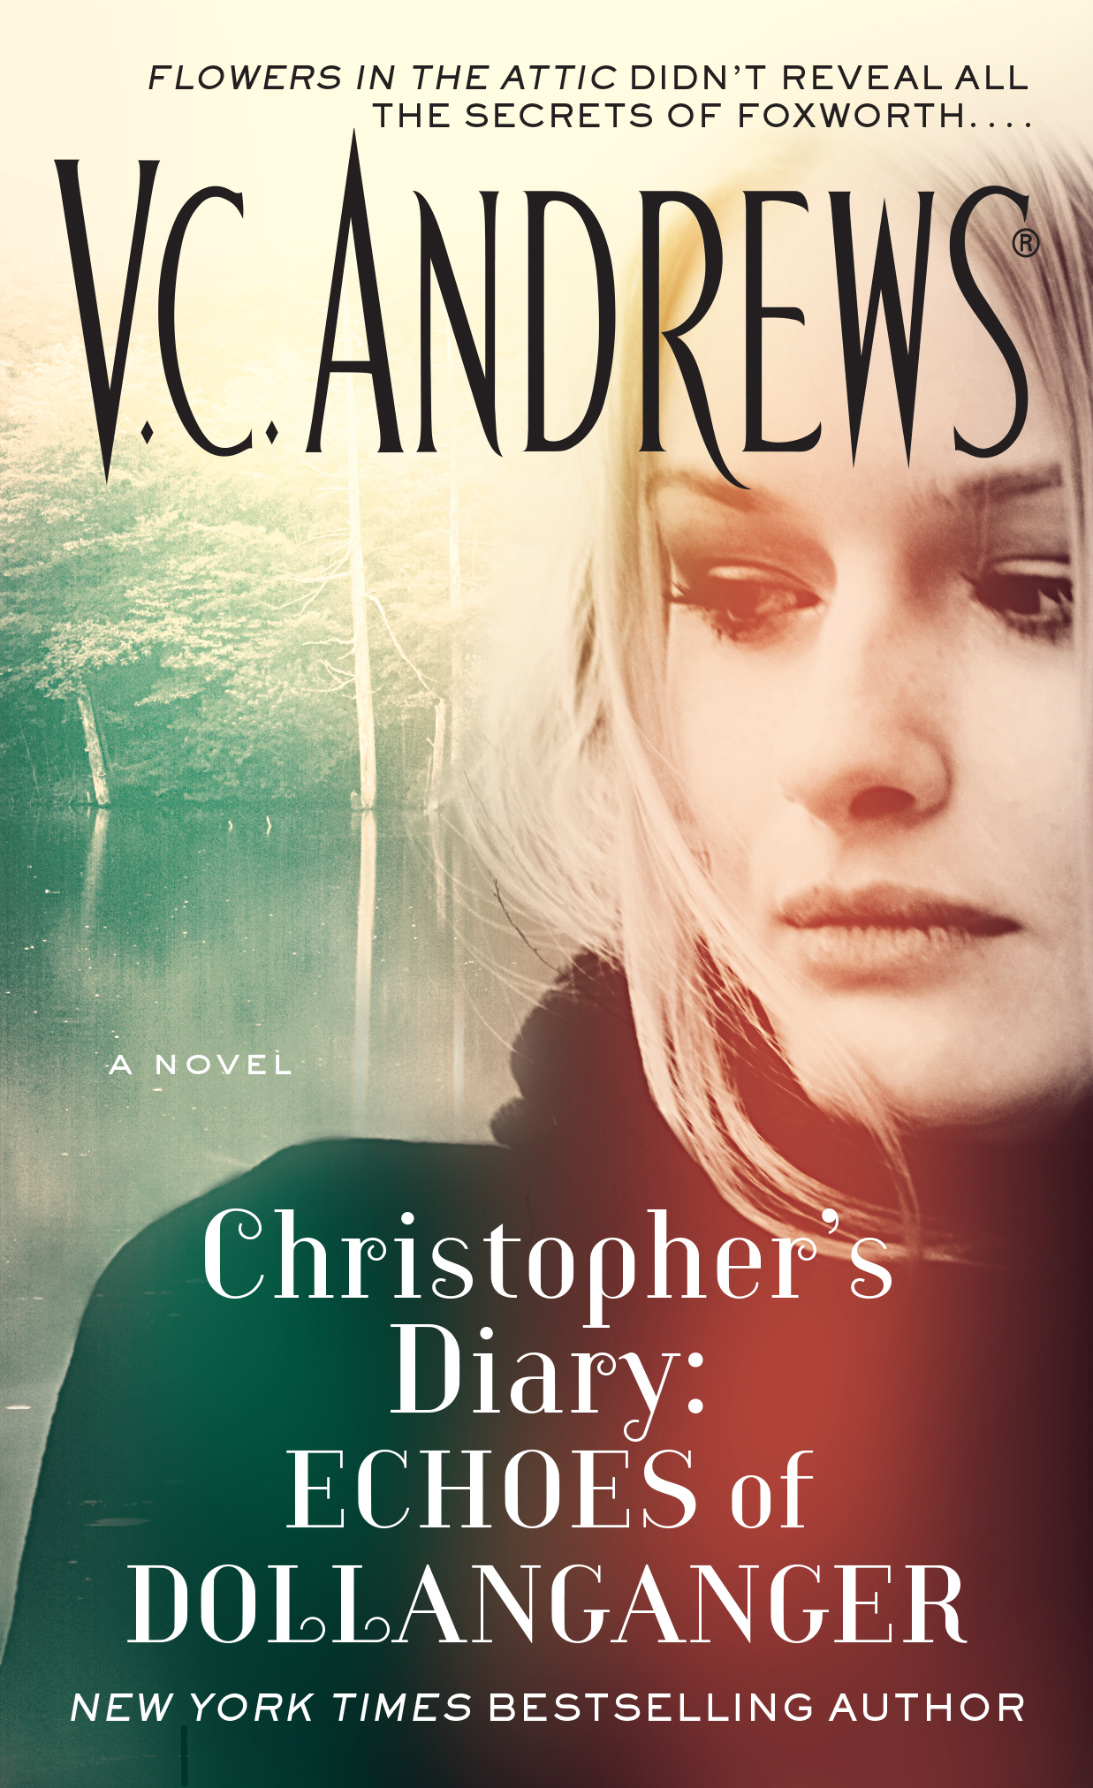 Echoes of Dollanganger by V.C. Andrews